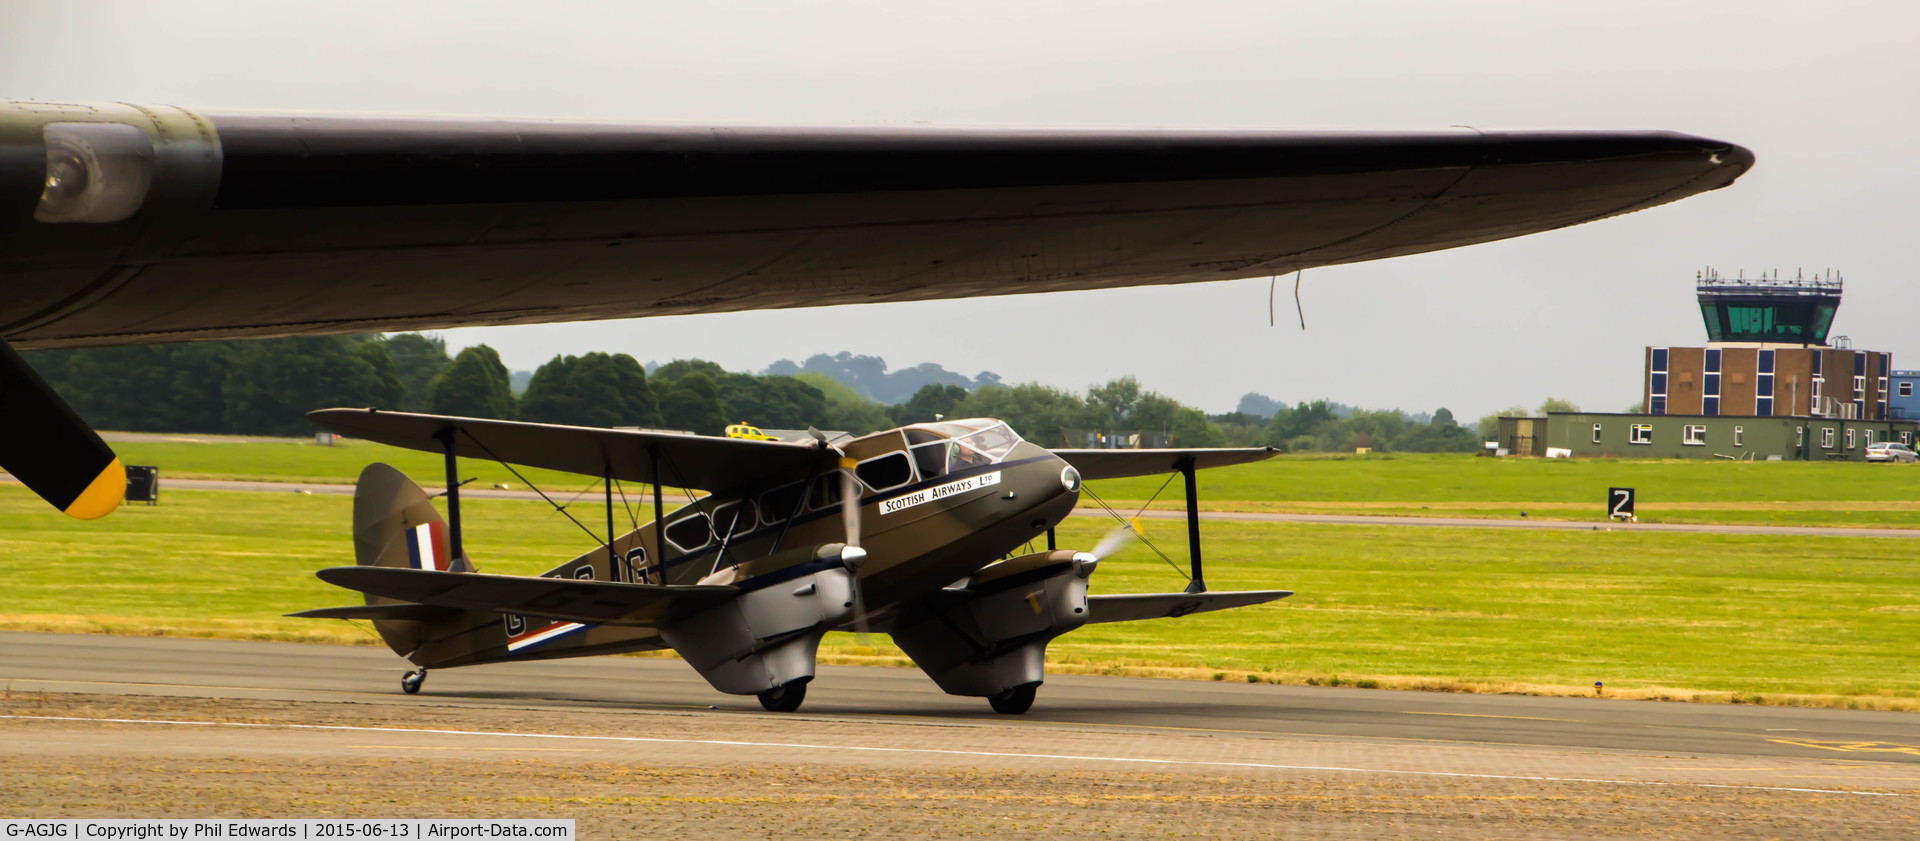 G-AGJG, 1941 De Havilland DH-89A Dominie/Dragon Rapide C/N 6517, G-AGJG - Taking off under the wing of a B17 at Northolt Aerodrome during RAF Northolt Centenary Open Day.